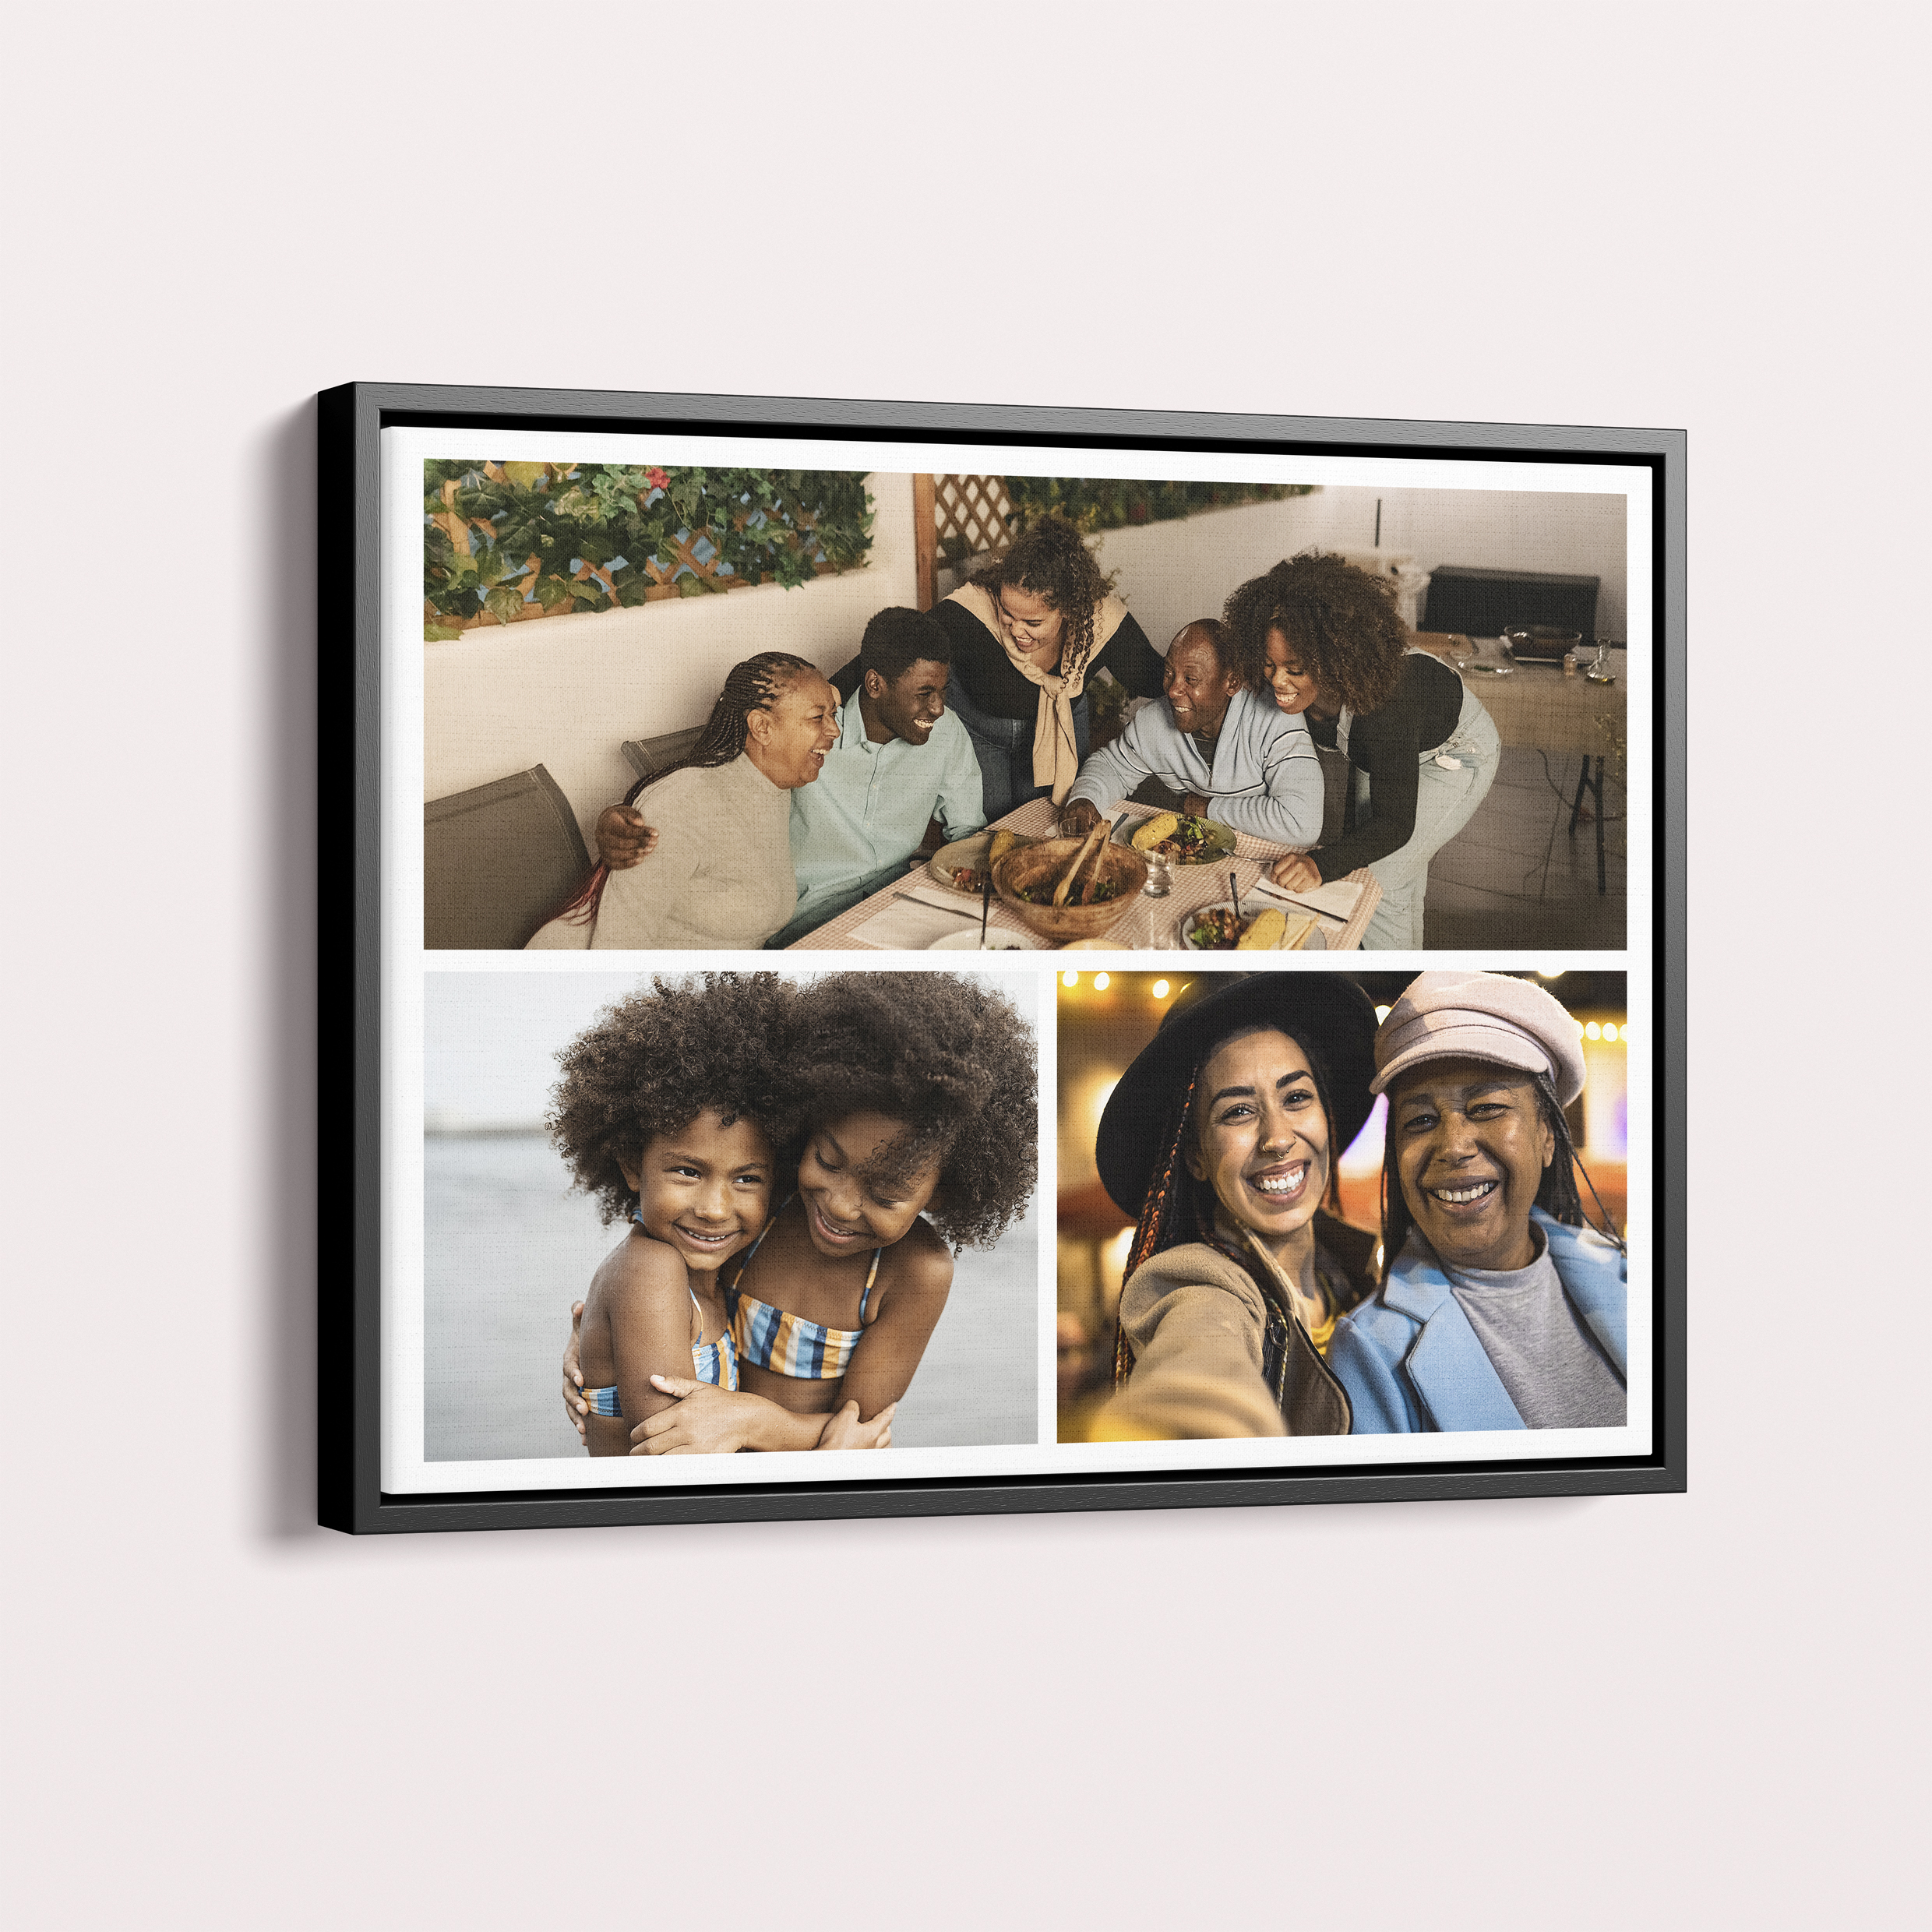  Personalized Trilogy Collage Framed Photo Canvas - Celebrate the power of three with a stunning landscape display showcasing three cherished photos.